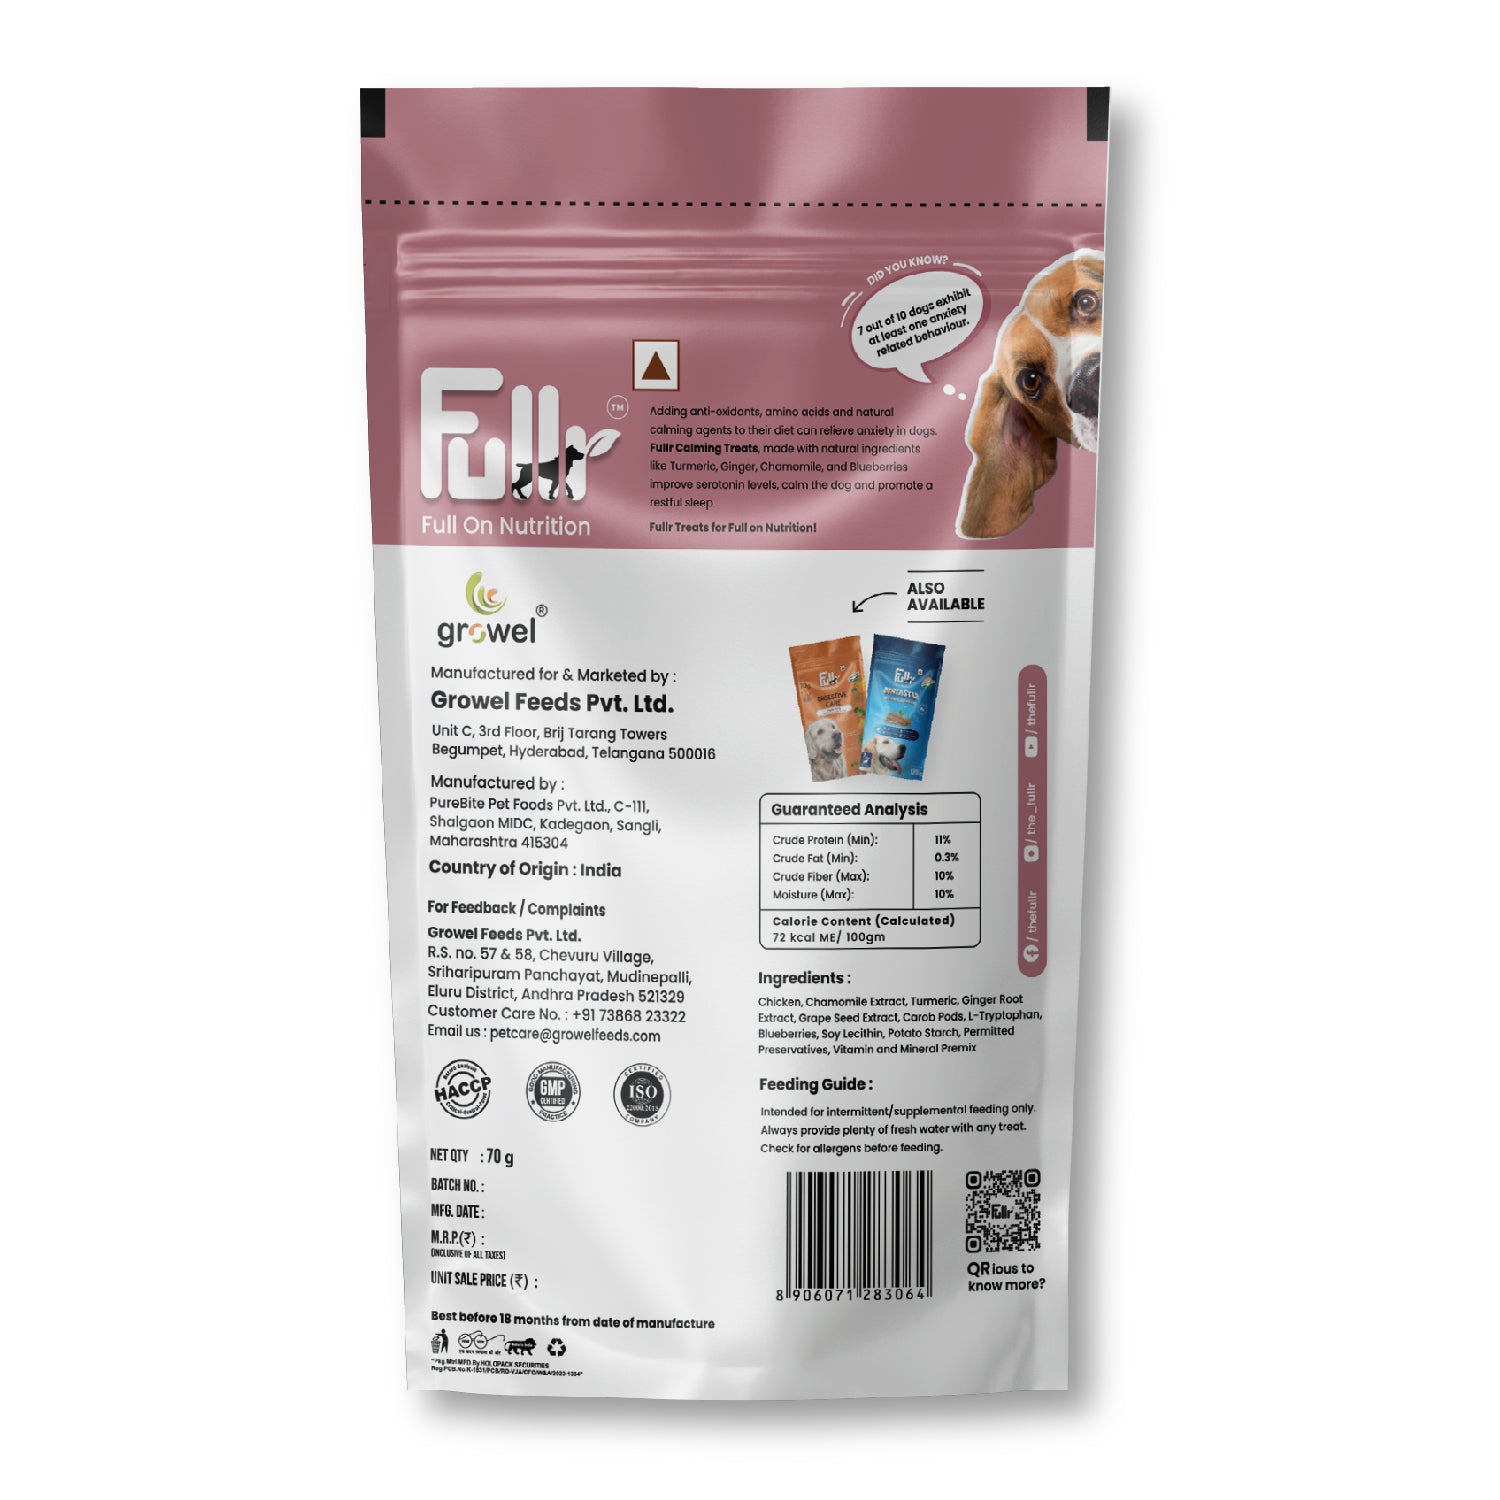 Packshot of Fullr Calming treats for dogs showing manufacturing details, feeding guide, ingredients and nutrition analysis.    Nutrition Analysis:  Crude Protein (Min): 11% Crude Fat (Min): 0.3% Crude Fiber (Max): 10% Moisture (Max): 10%  Calorie content calculated: 72 kcal ME/100 gm.